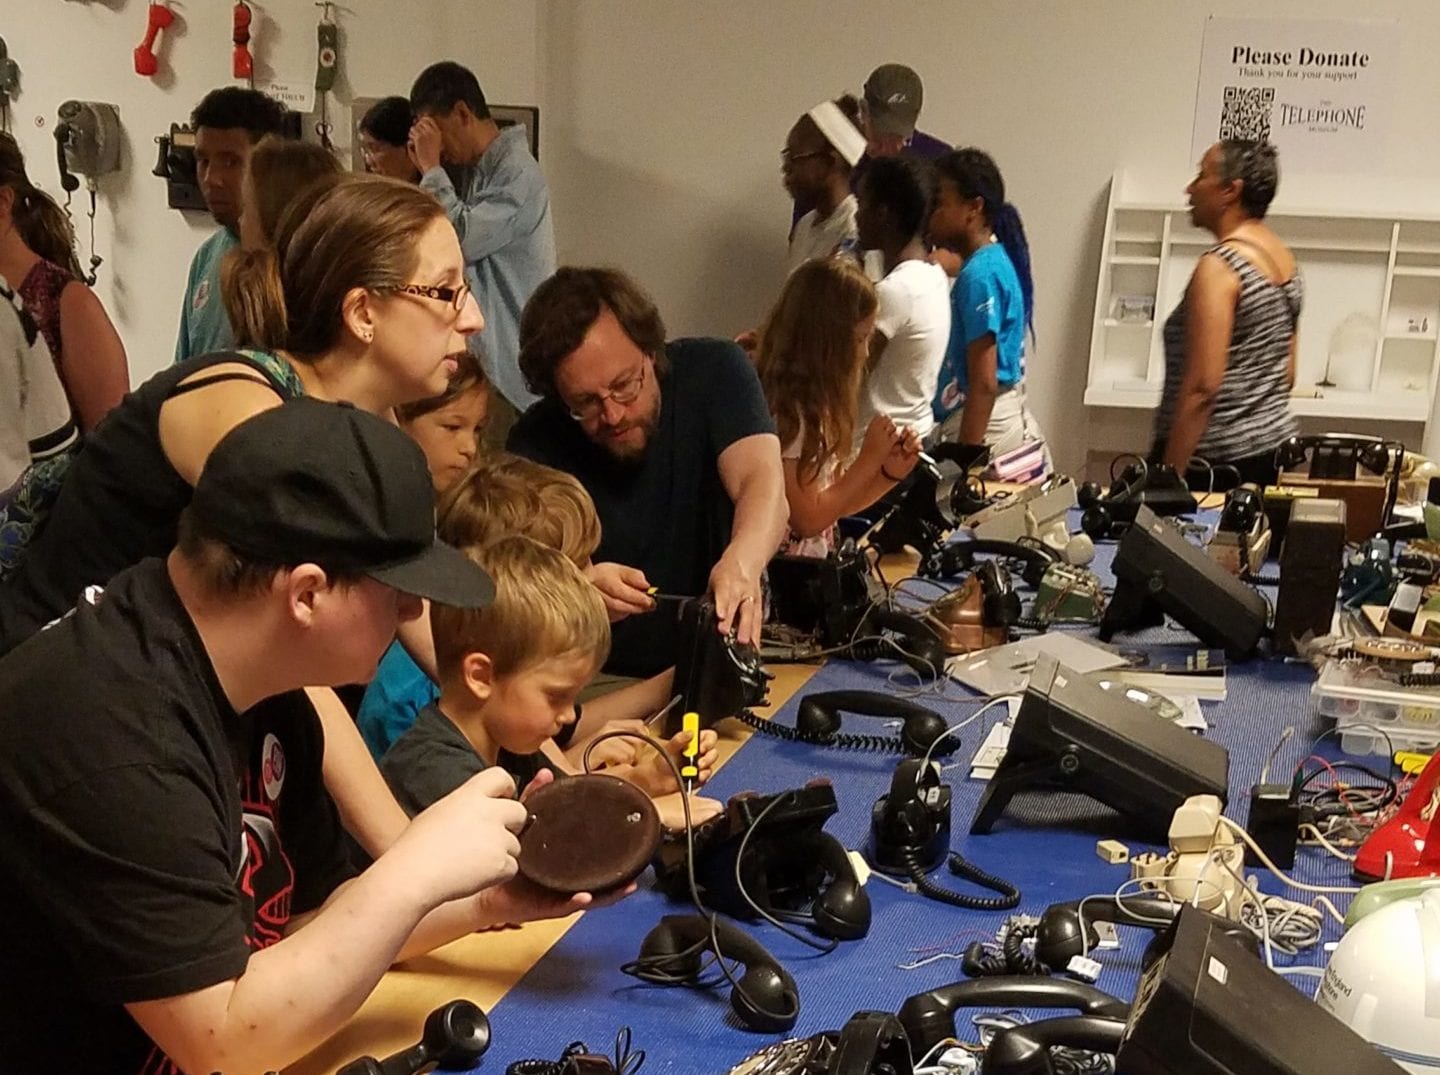 Free Fun Friday at The Telephone Museum